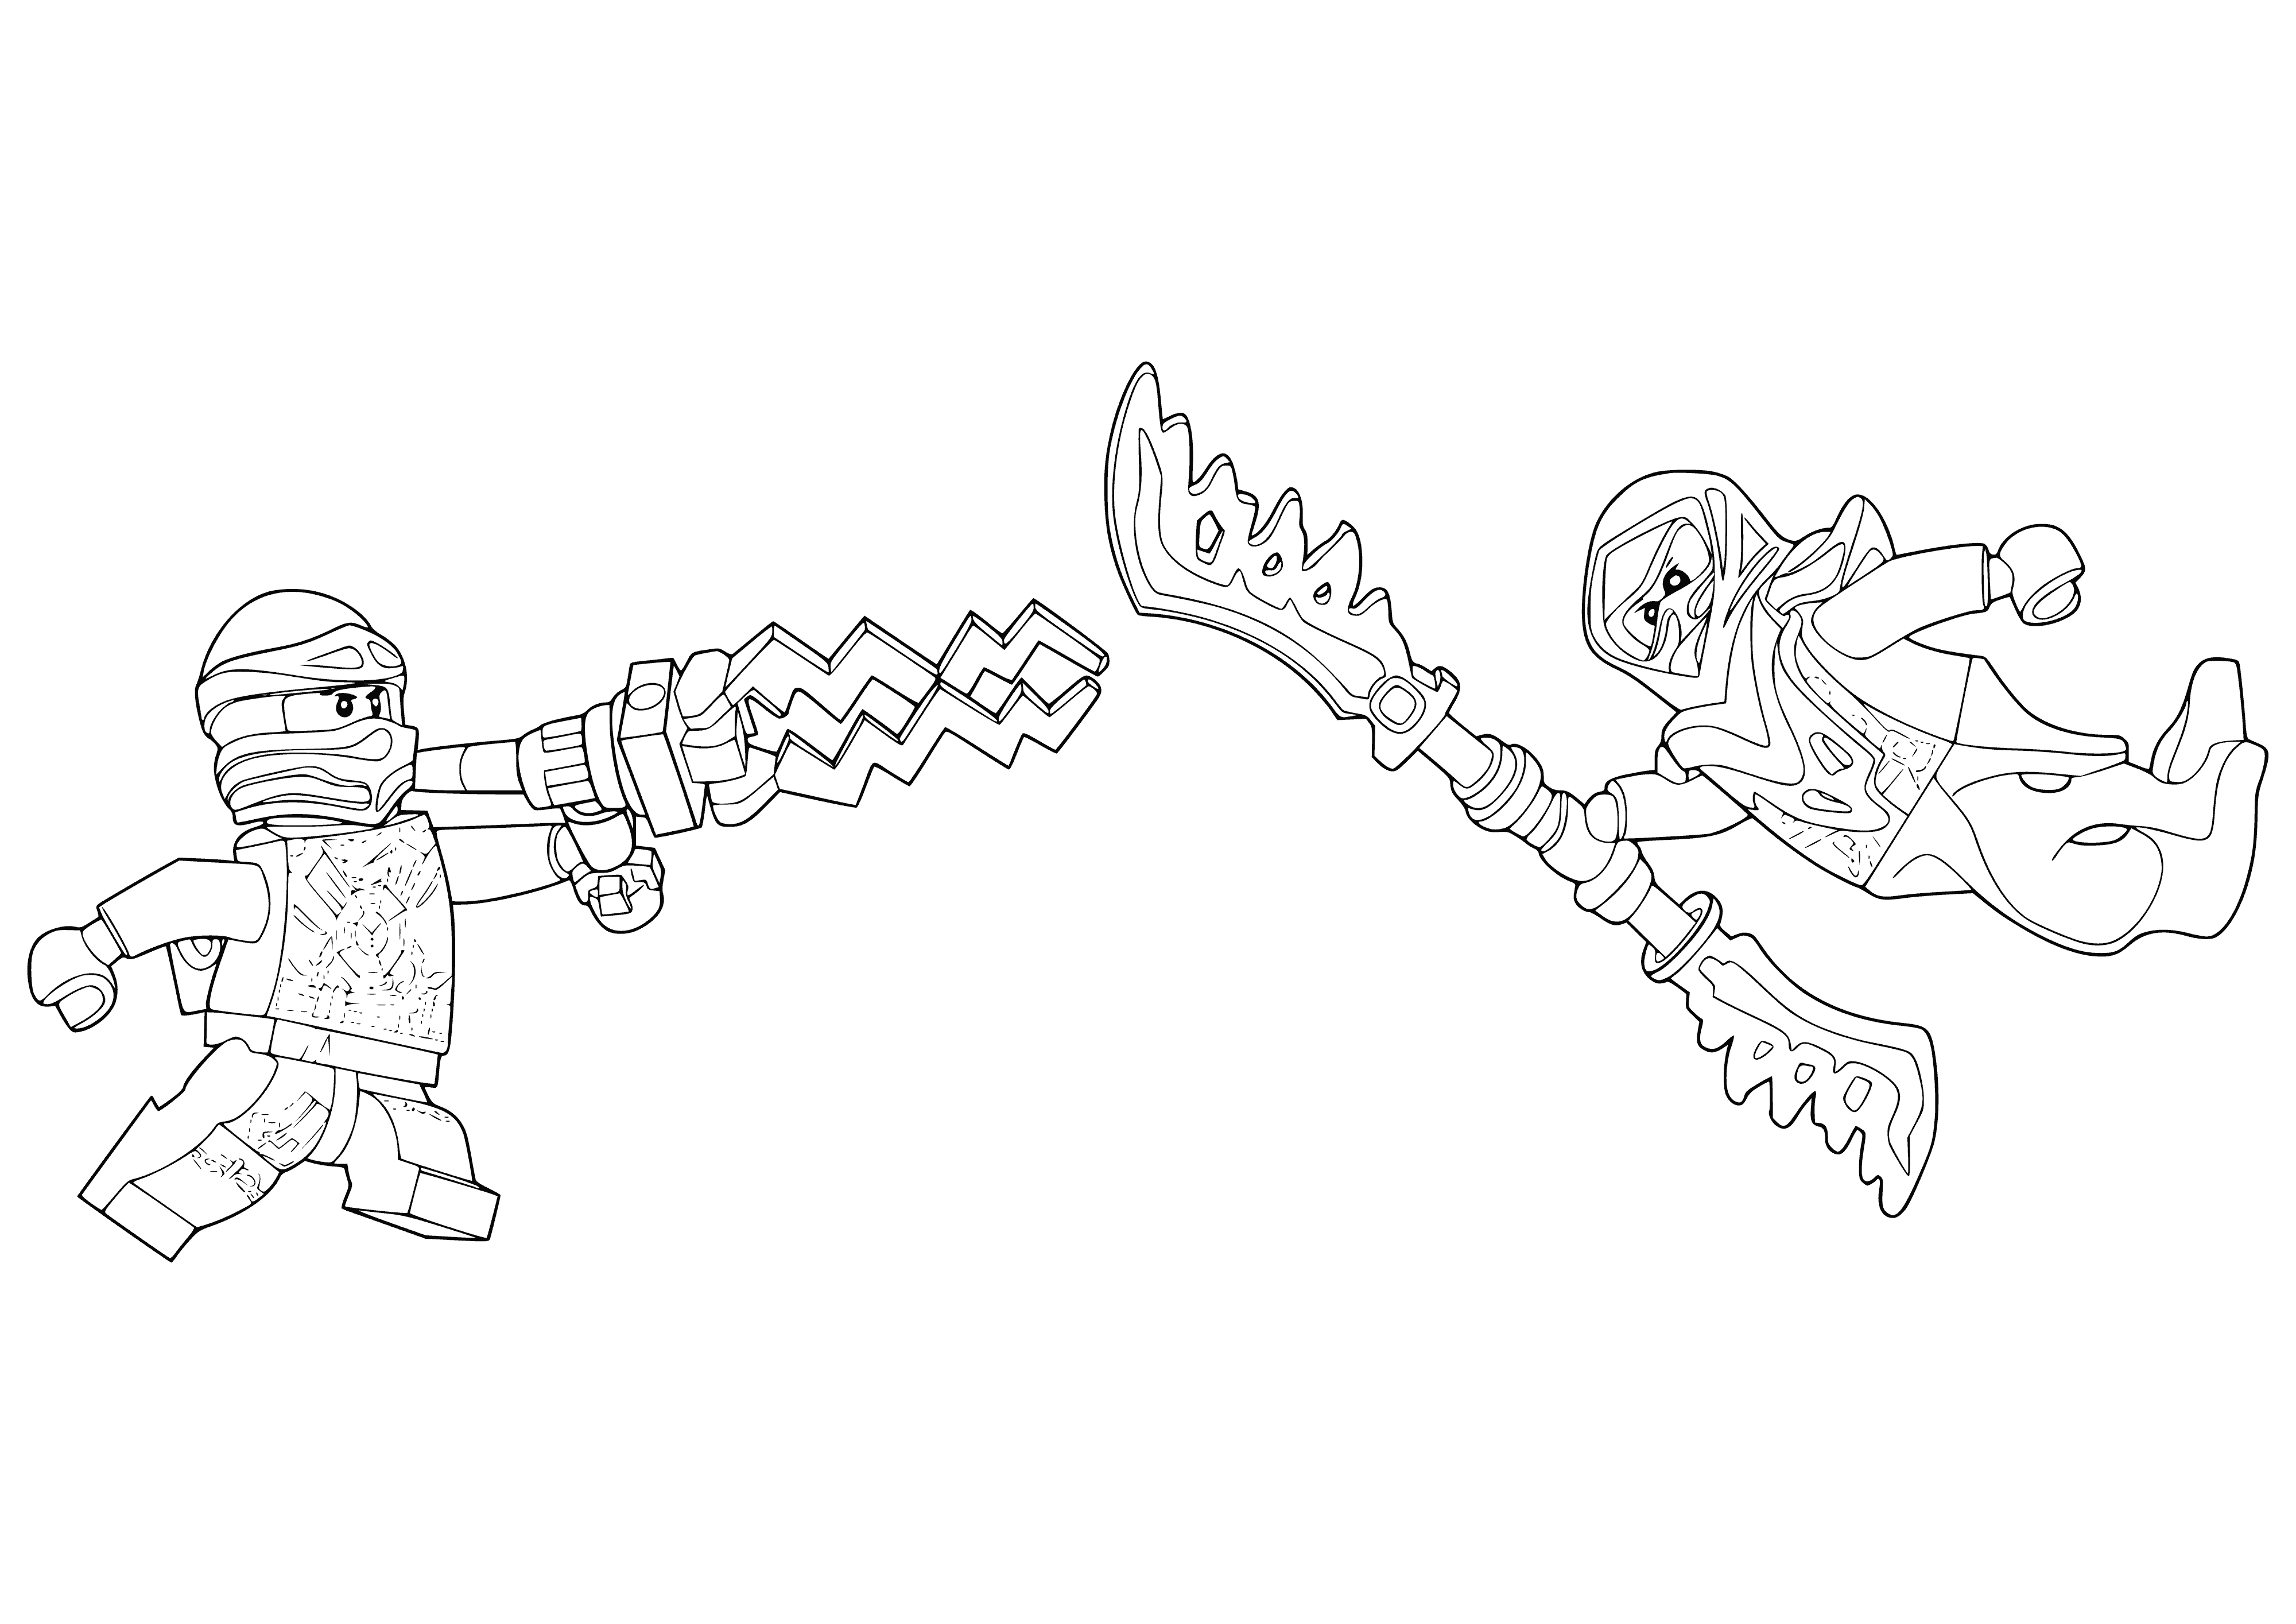 coloring page: Jay wielding a golden sword battles a ghostly Banshee with tattered wings and a sword.